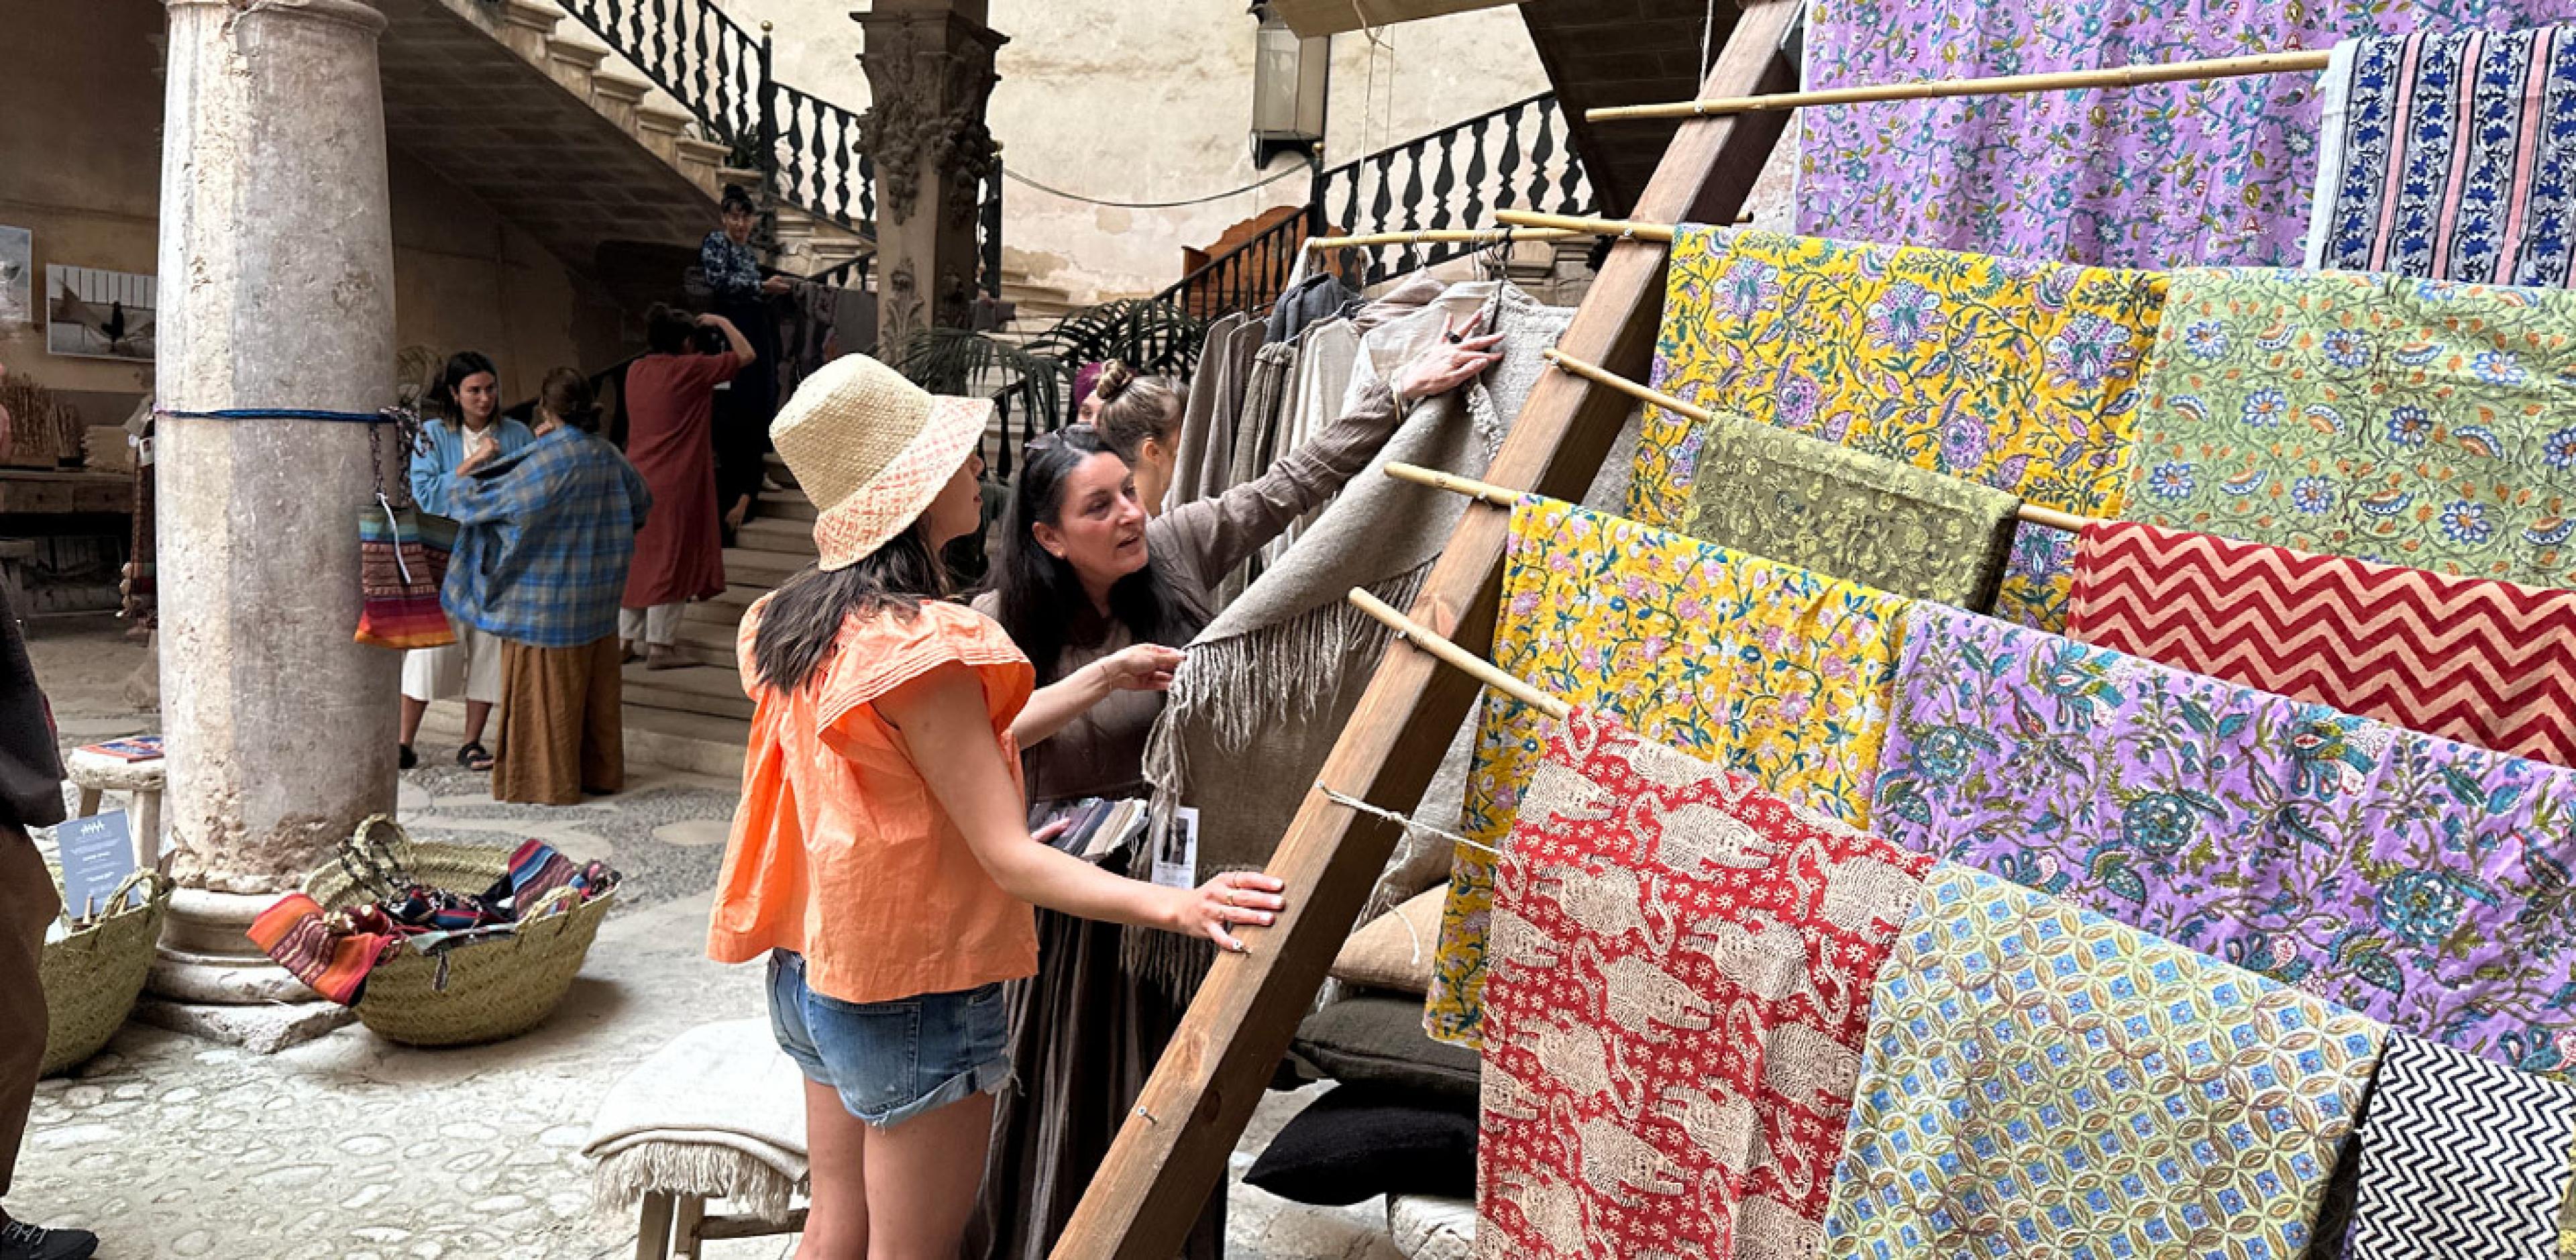 two women look at textile display in historic building 